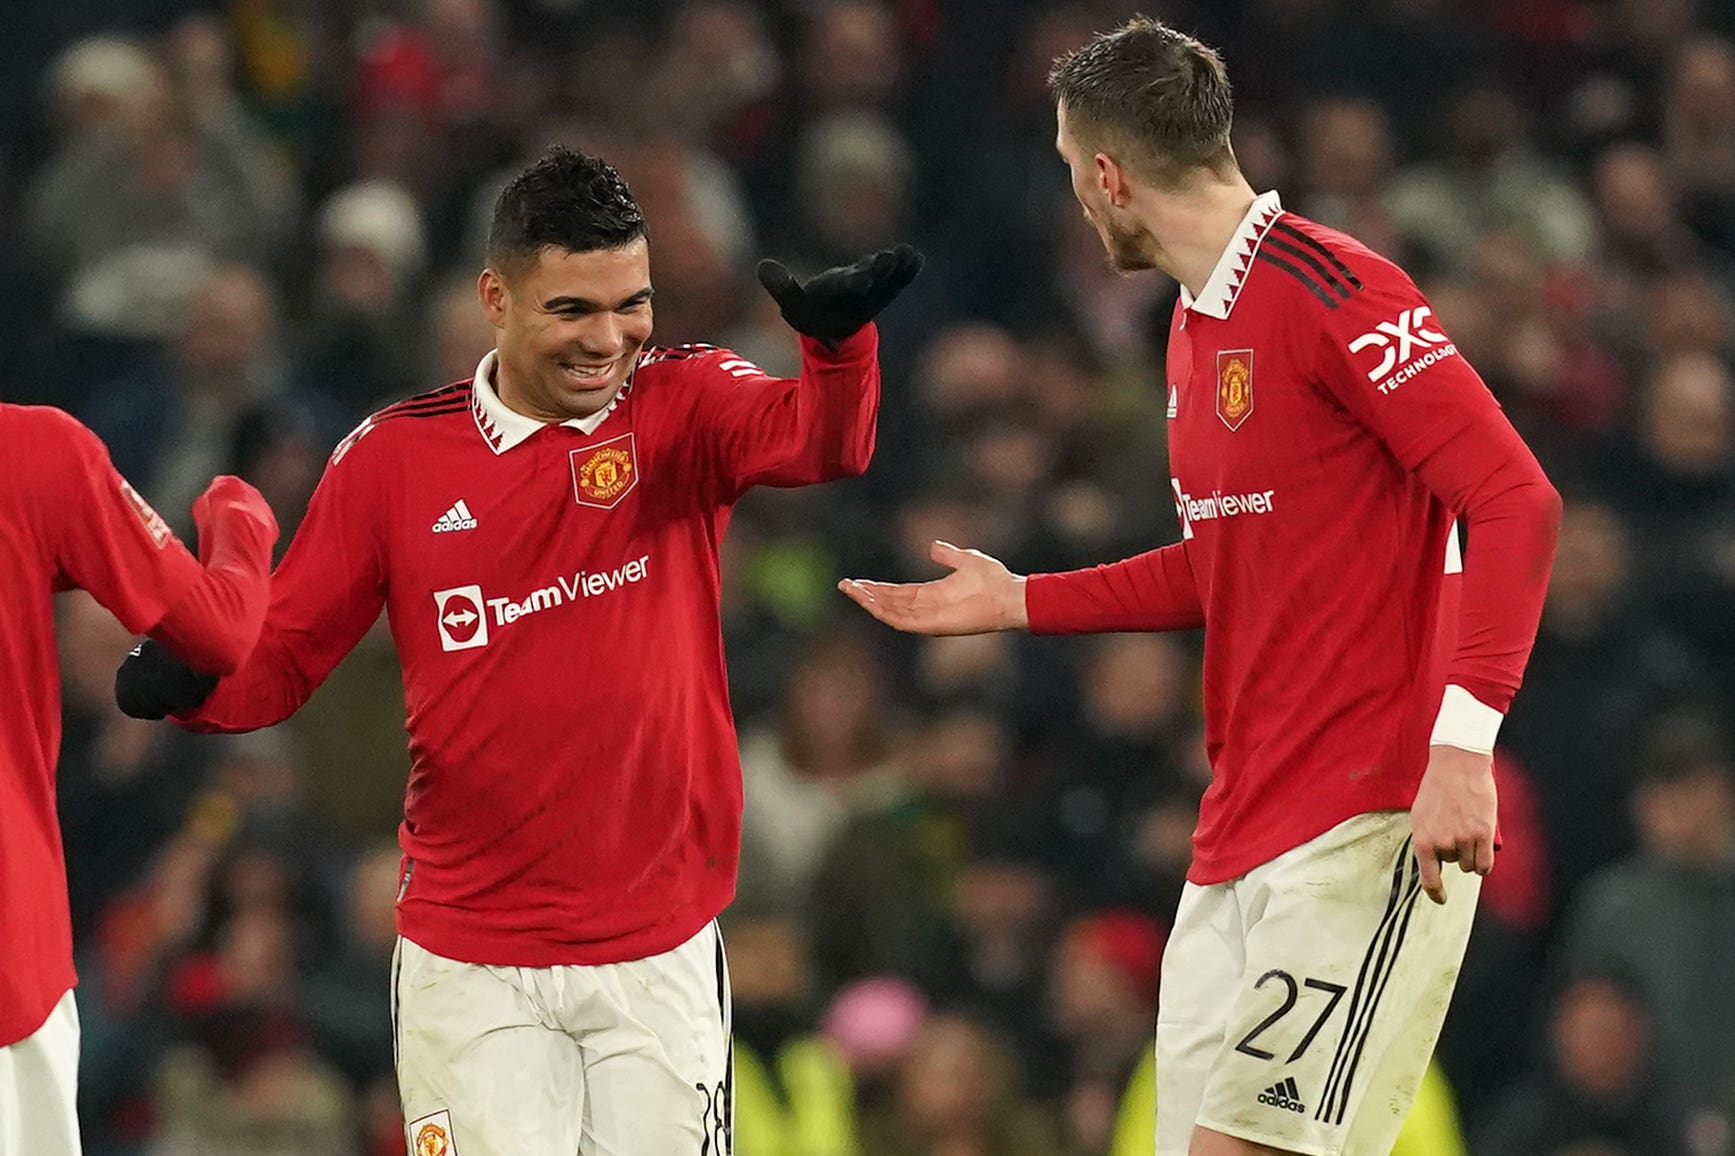 Casemiro is lighting it up at Manchester United